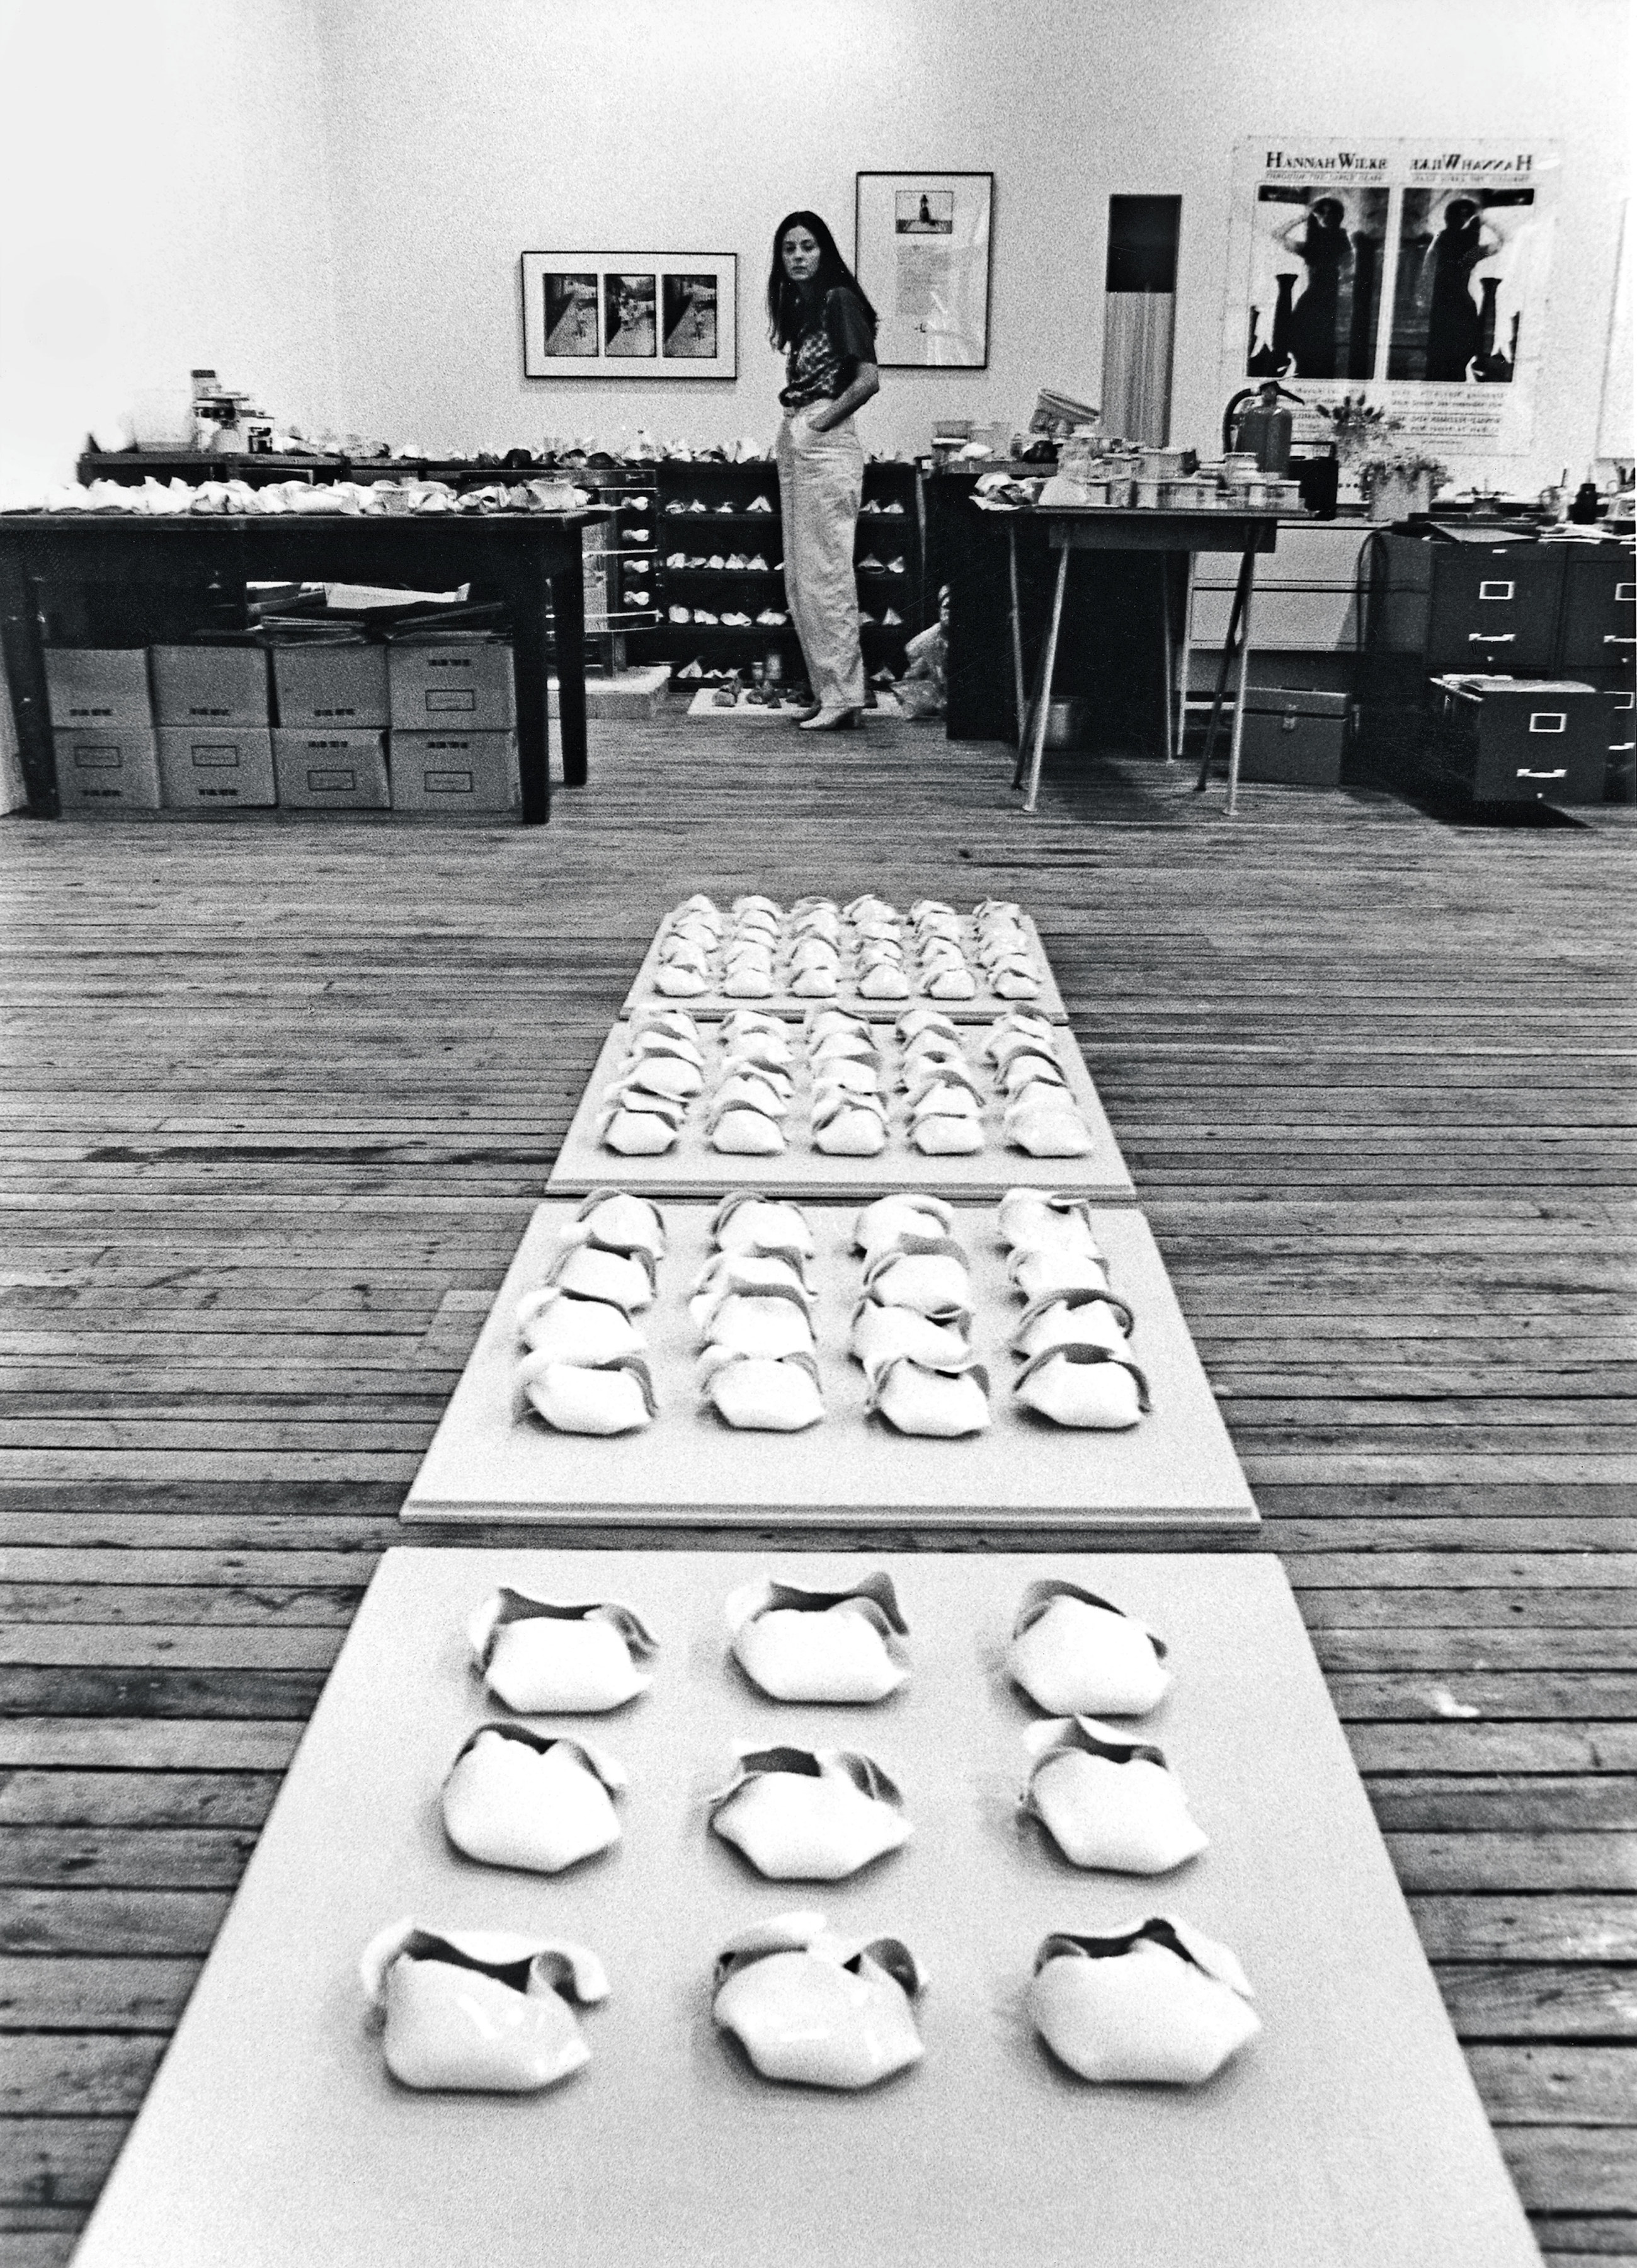 Hannah Wilke with Elective Affinities in
her Greene Street studio, 1978
Image: Hannah Wilke Collection &amp;amp; Archive, Los Angeles